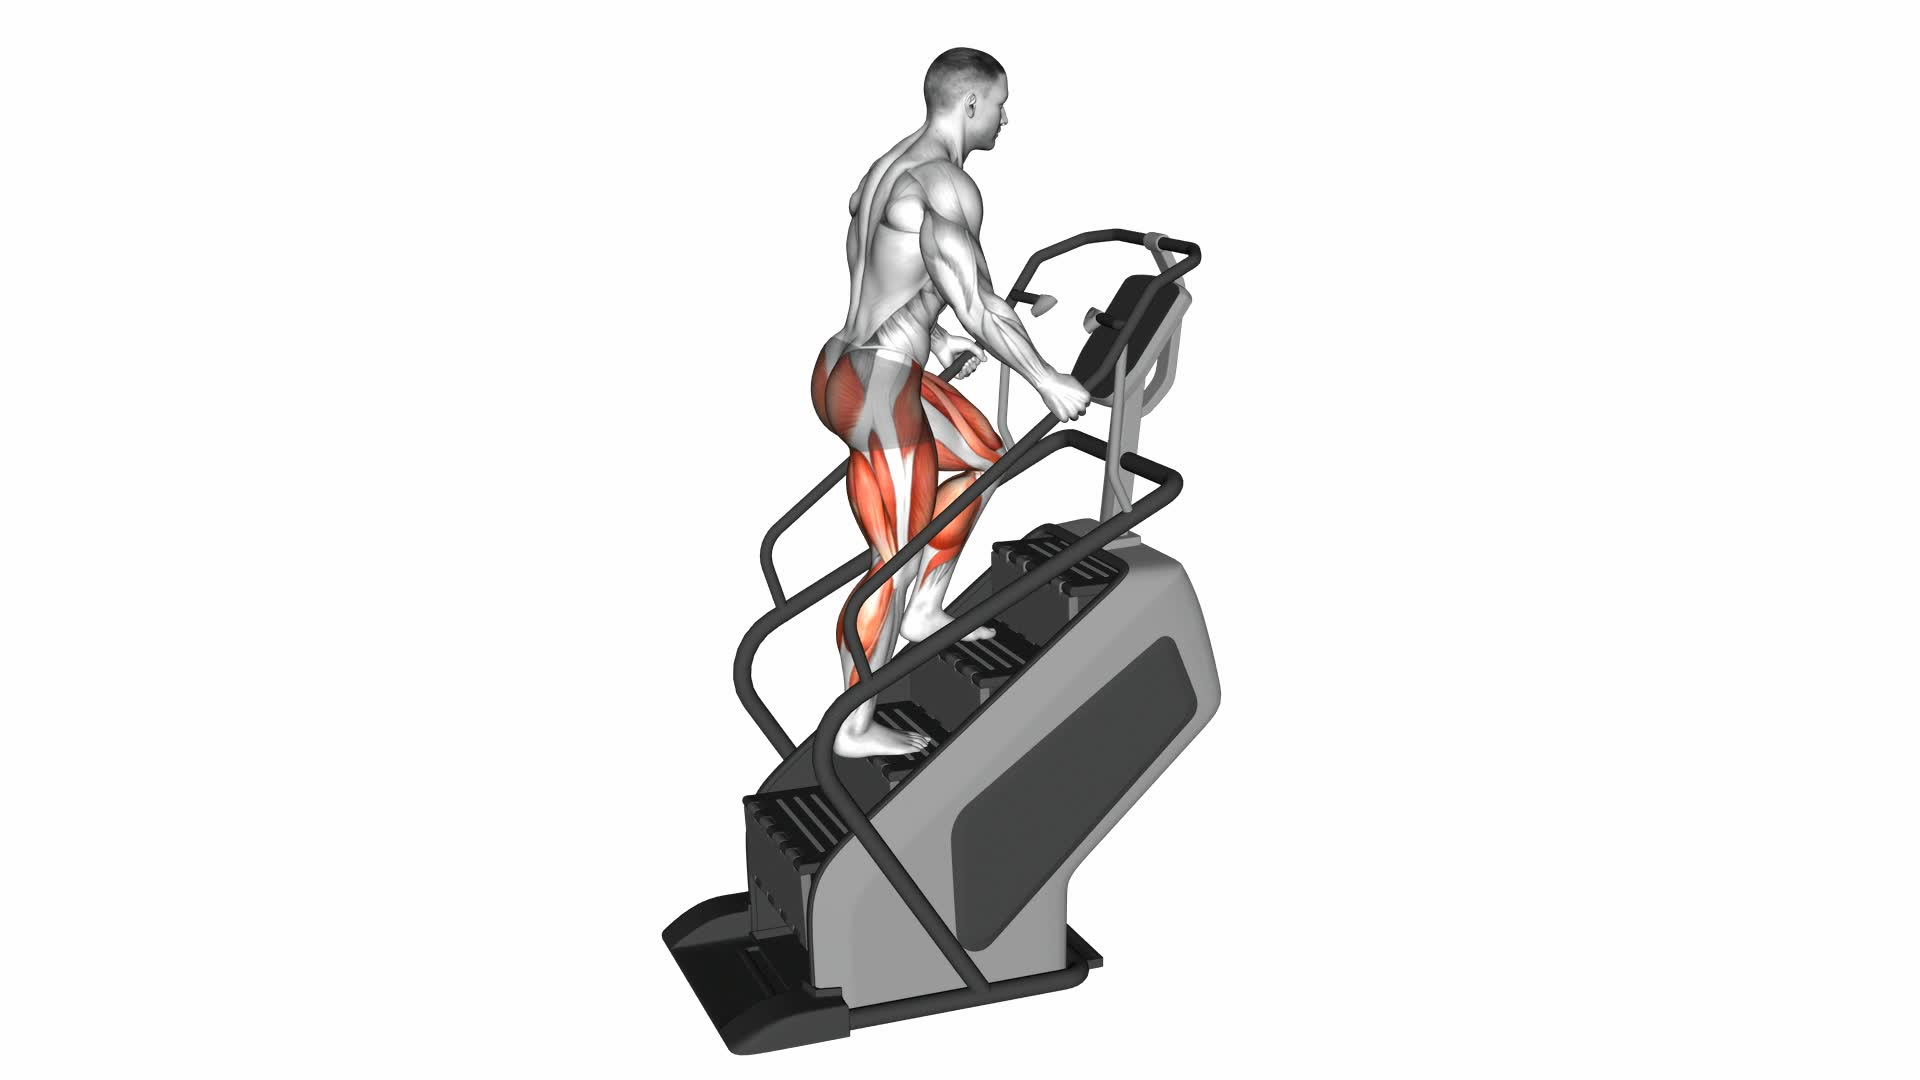 Walking on Stepmill - Video Exercise Guide & Tips